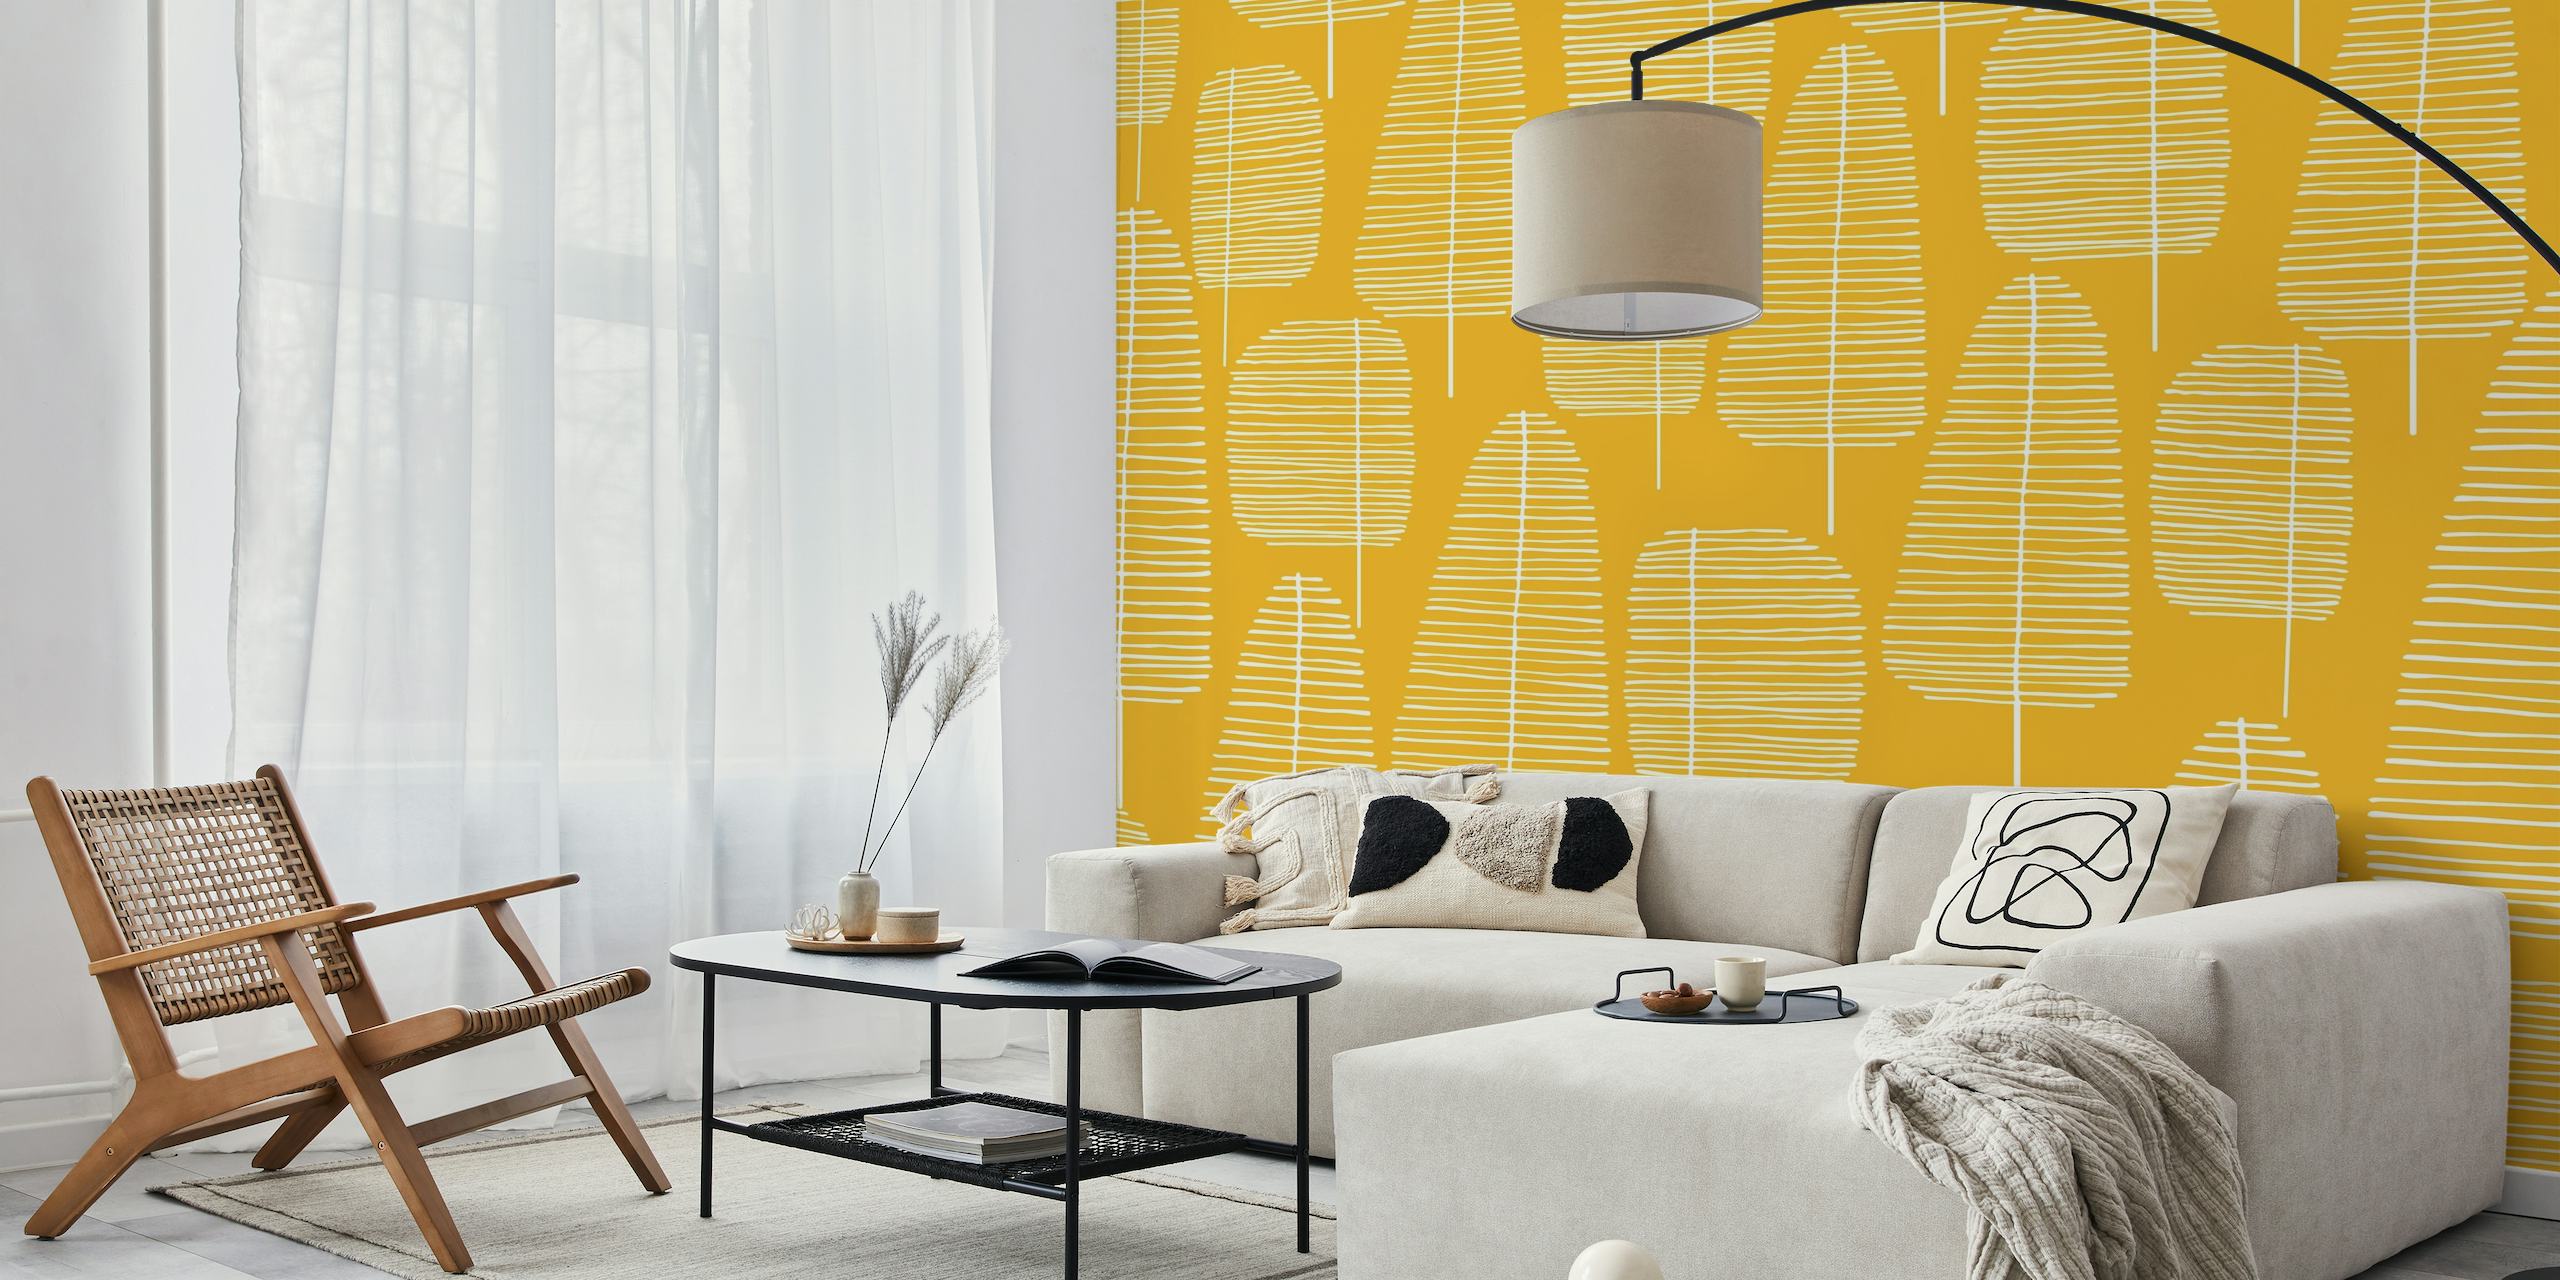 Stylized mid-century modern forest pattern wall mural in yellow